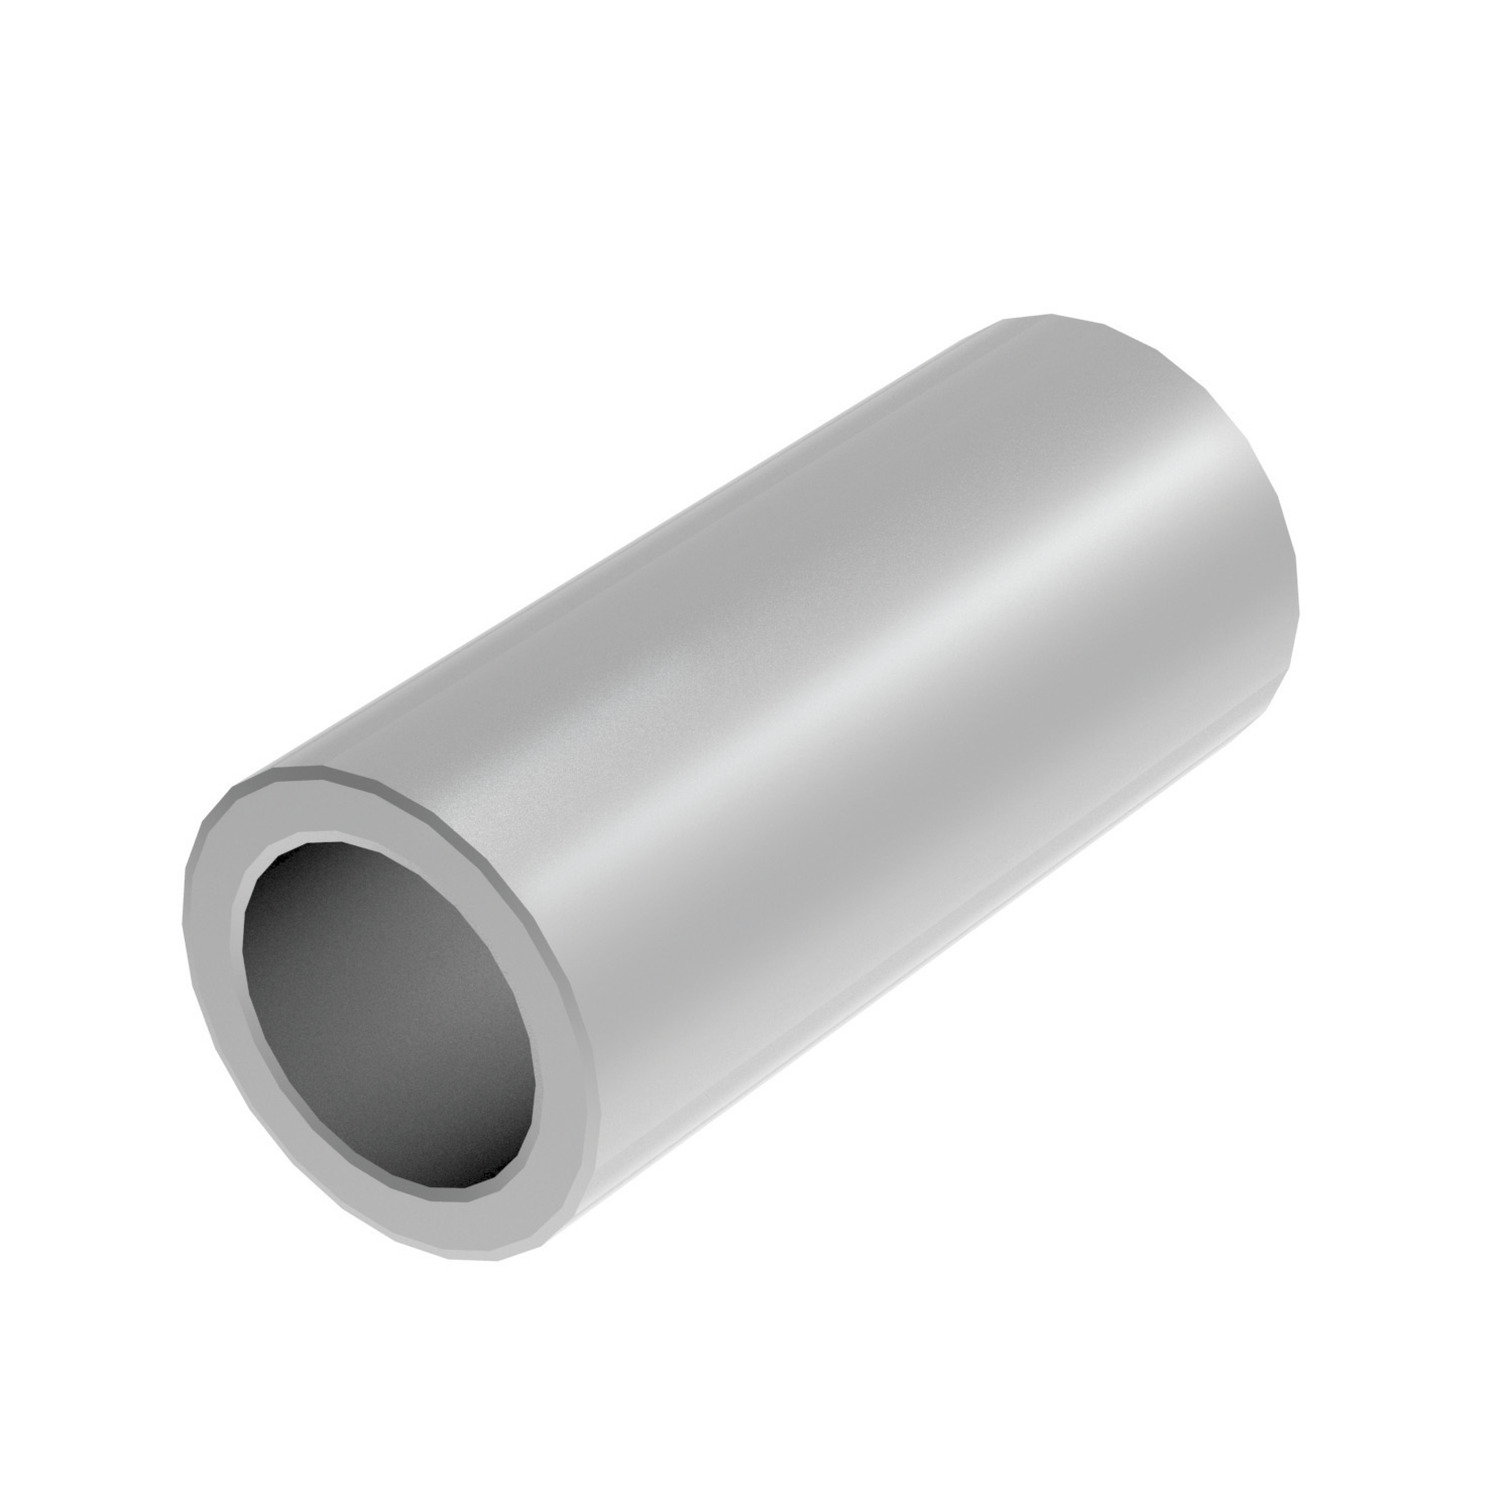 Steel Clearance Spacers Cylindrical spacers from steel, zinc plated. For clearance of threads M2.5 to M8.